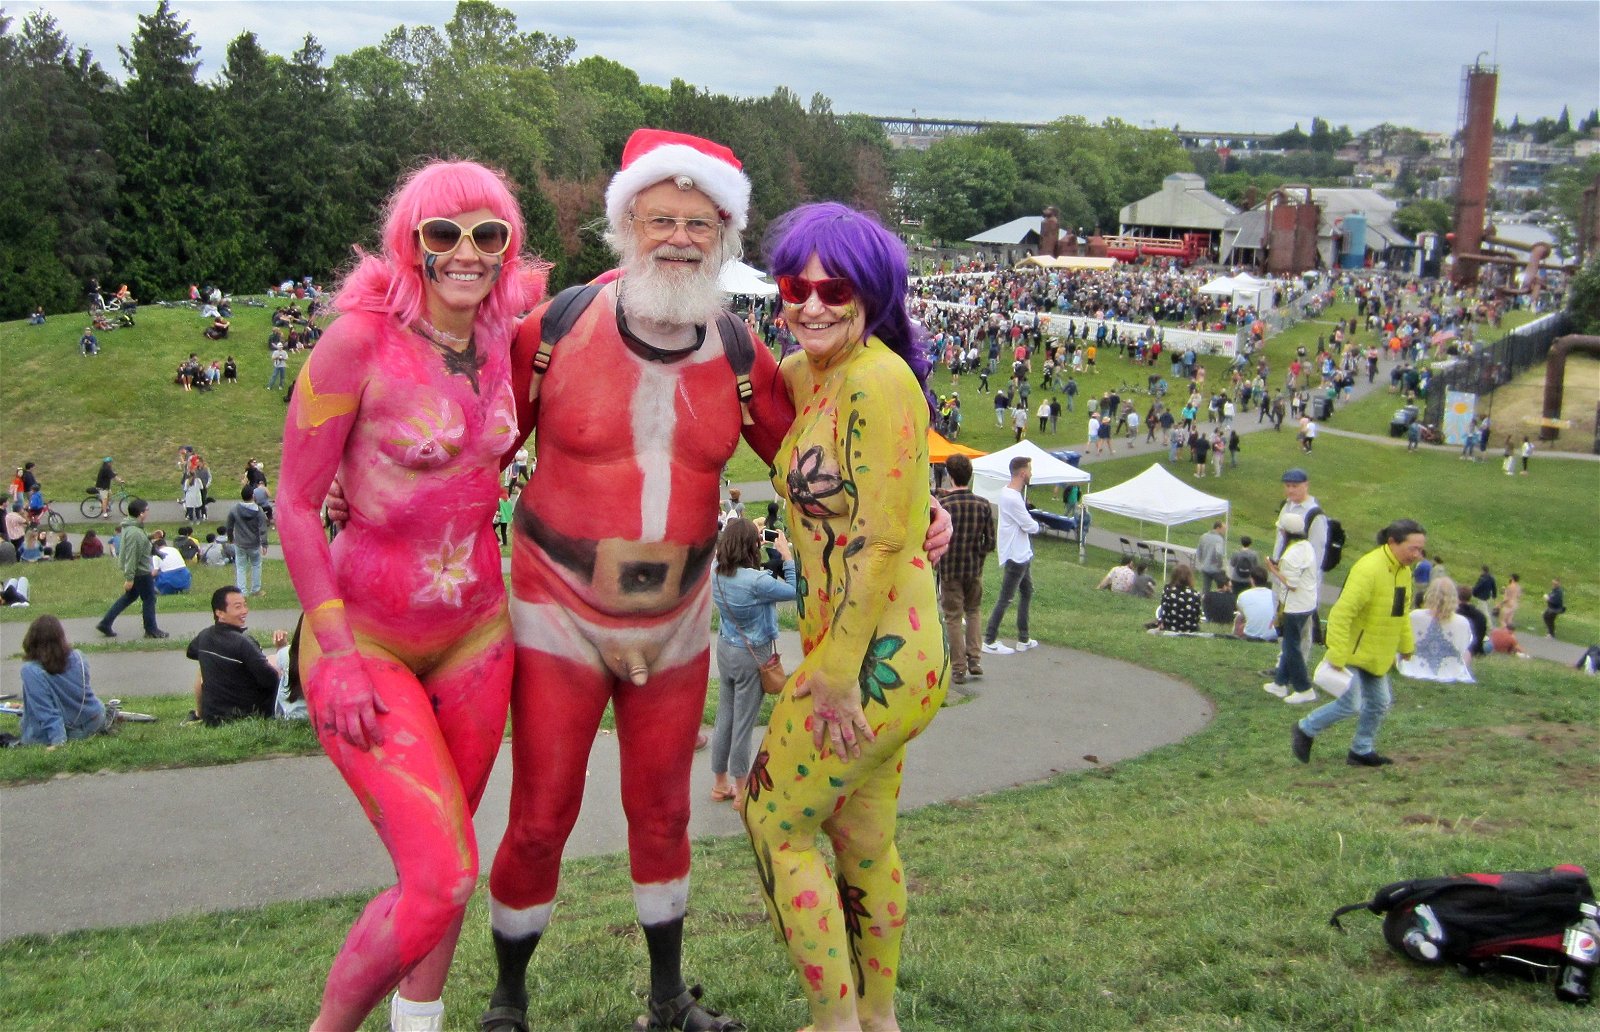 Photo by rt682 with the username @rt682,  December 25, 2020 at 8:10 AM. The post is about the topic Naked in public and the text says '#Merry Christmas #nude #naked #nudity #body paint #Seattle #Fremont Solstice Parade #nude in public'